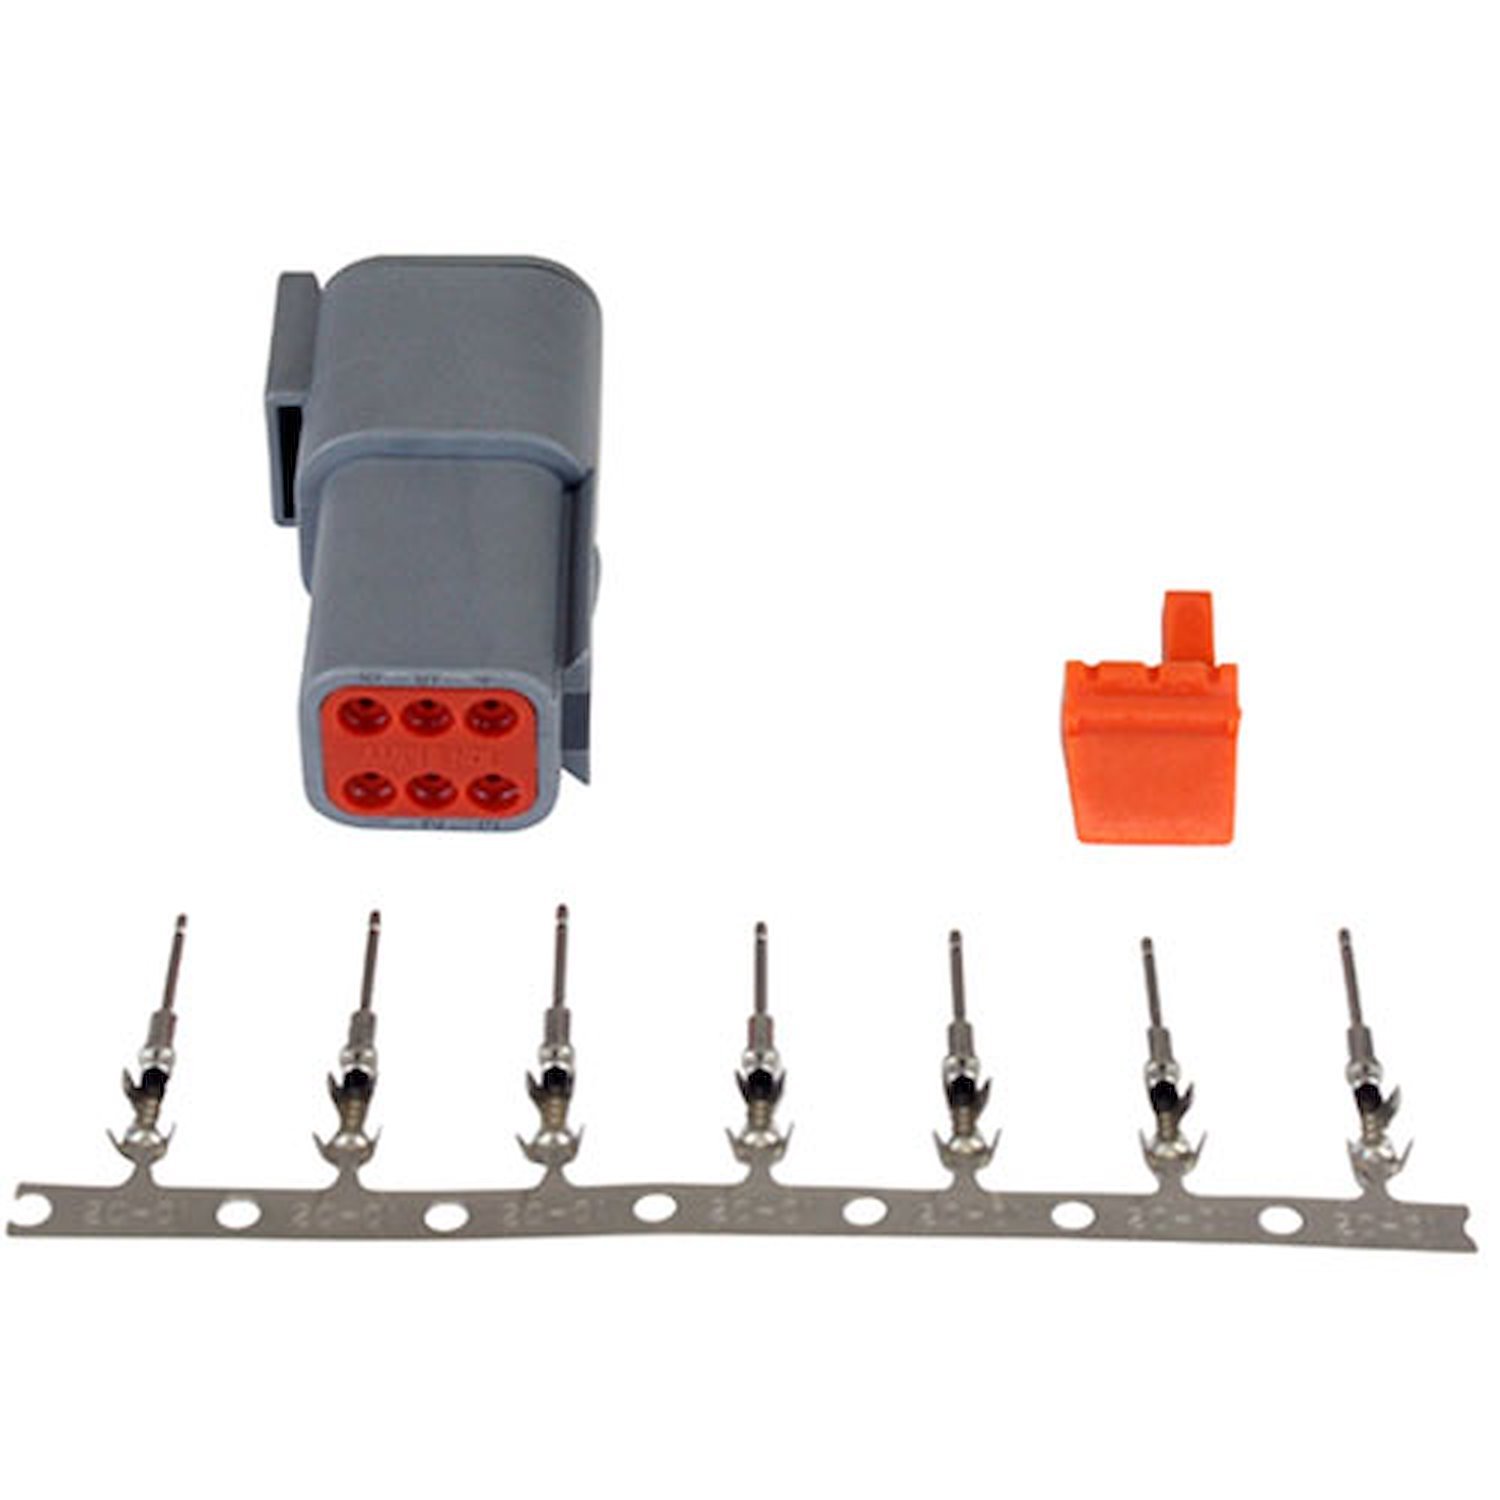 DTM-Style 6-Way Receptacle Connector Kit Includes Receptacle, Receptacle Wedge Lock And 7 Male Pins